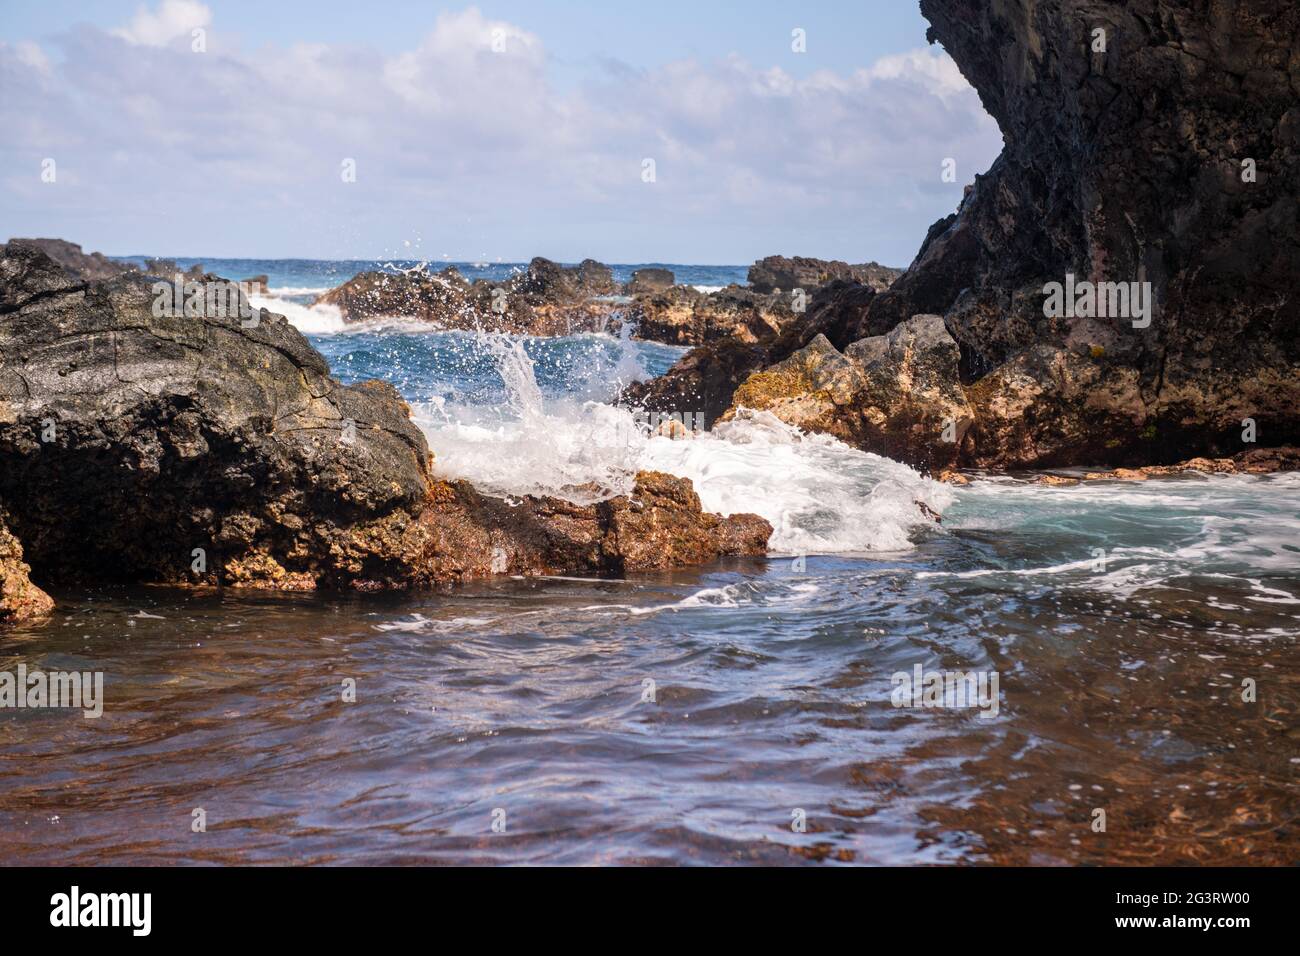 Sea waves and rock on the beach. Stock Photo